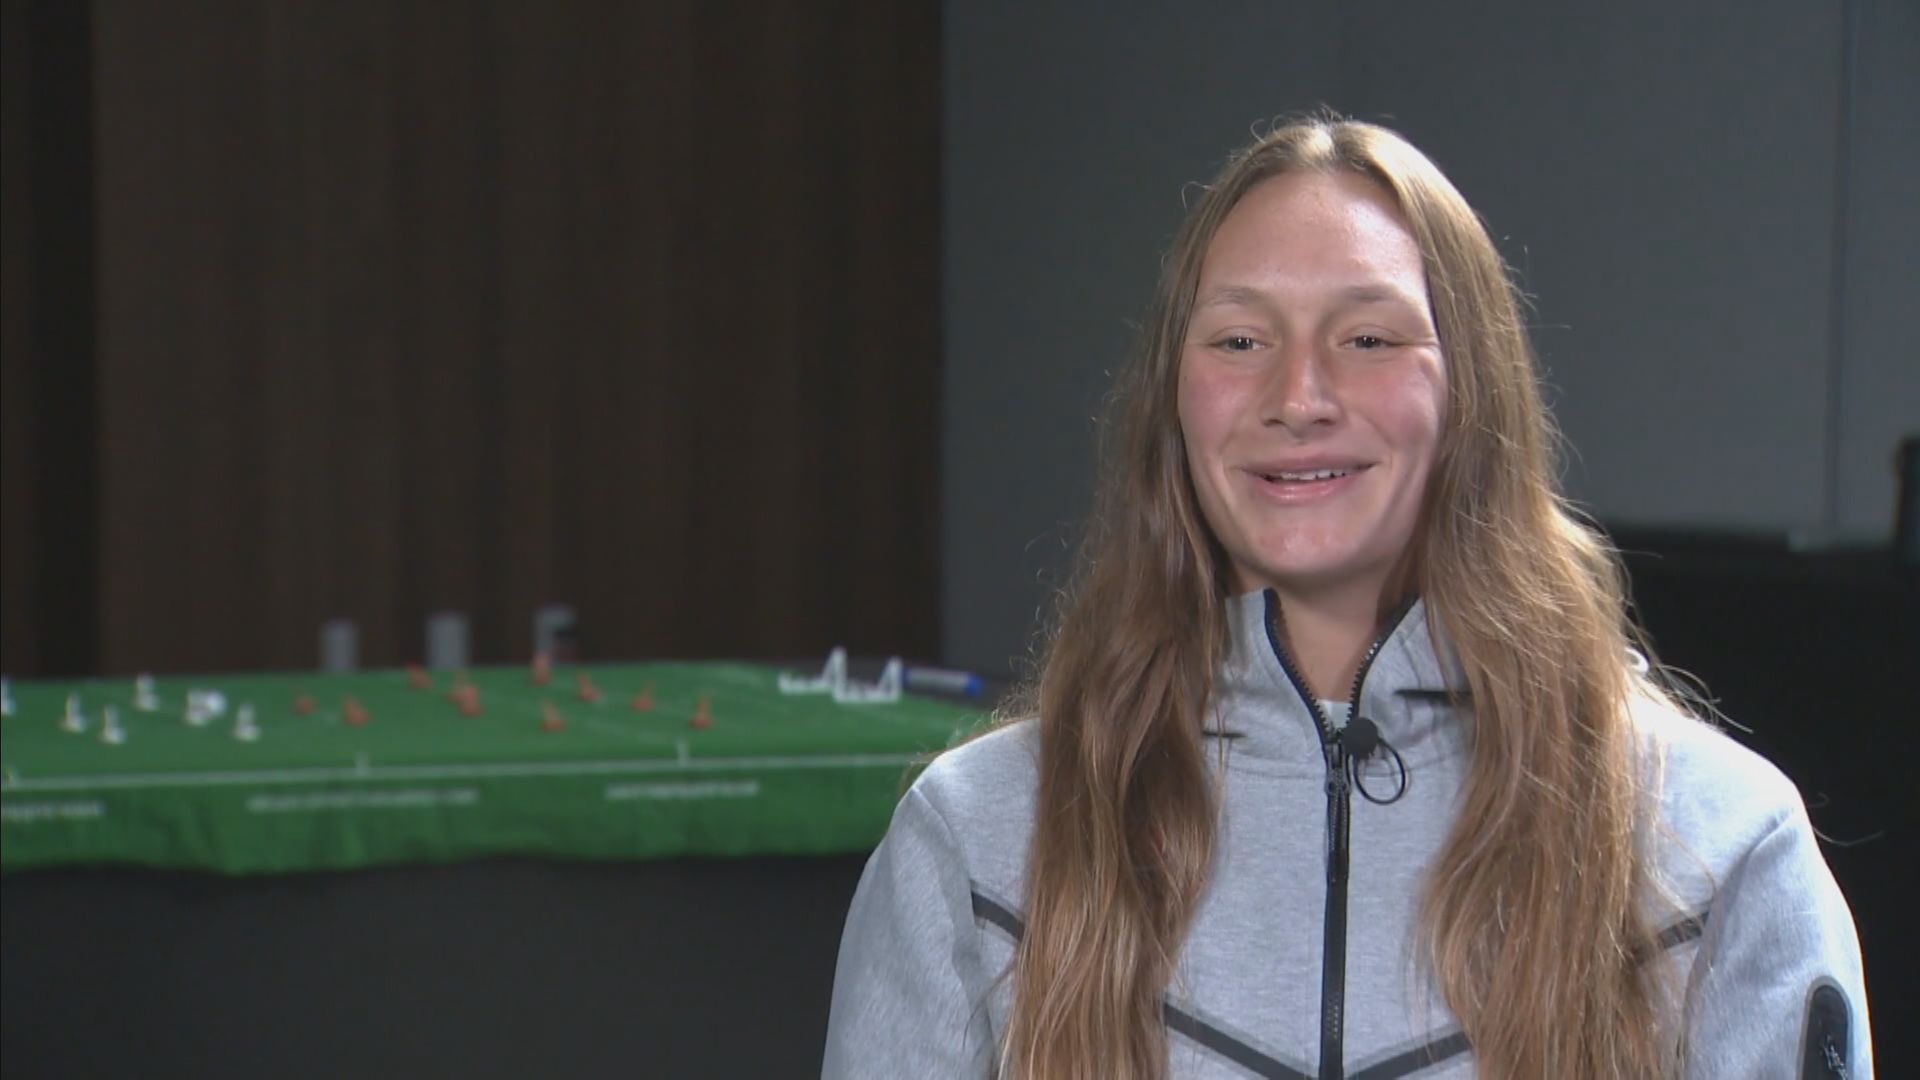 Quebec keeper on ‘huge honour’ of being part of Canada’s national soccer team